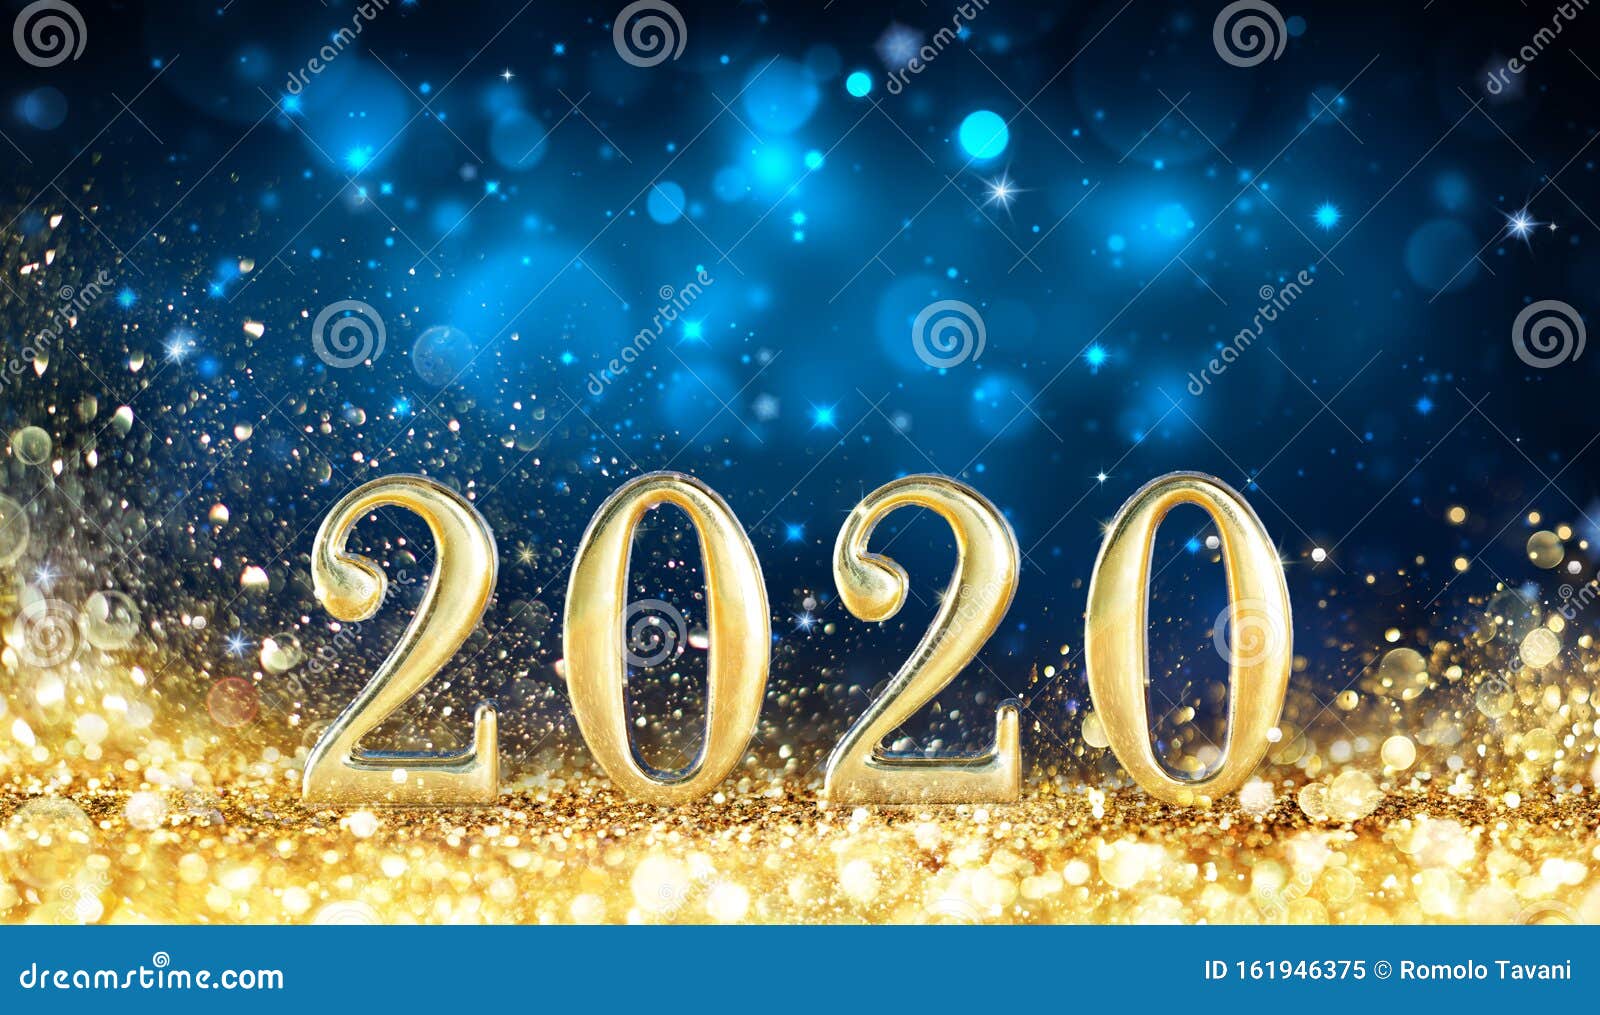 Happy New Year 2020 - Metal Number with Golden Glitter Stock Image ...